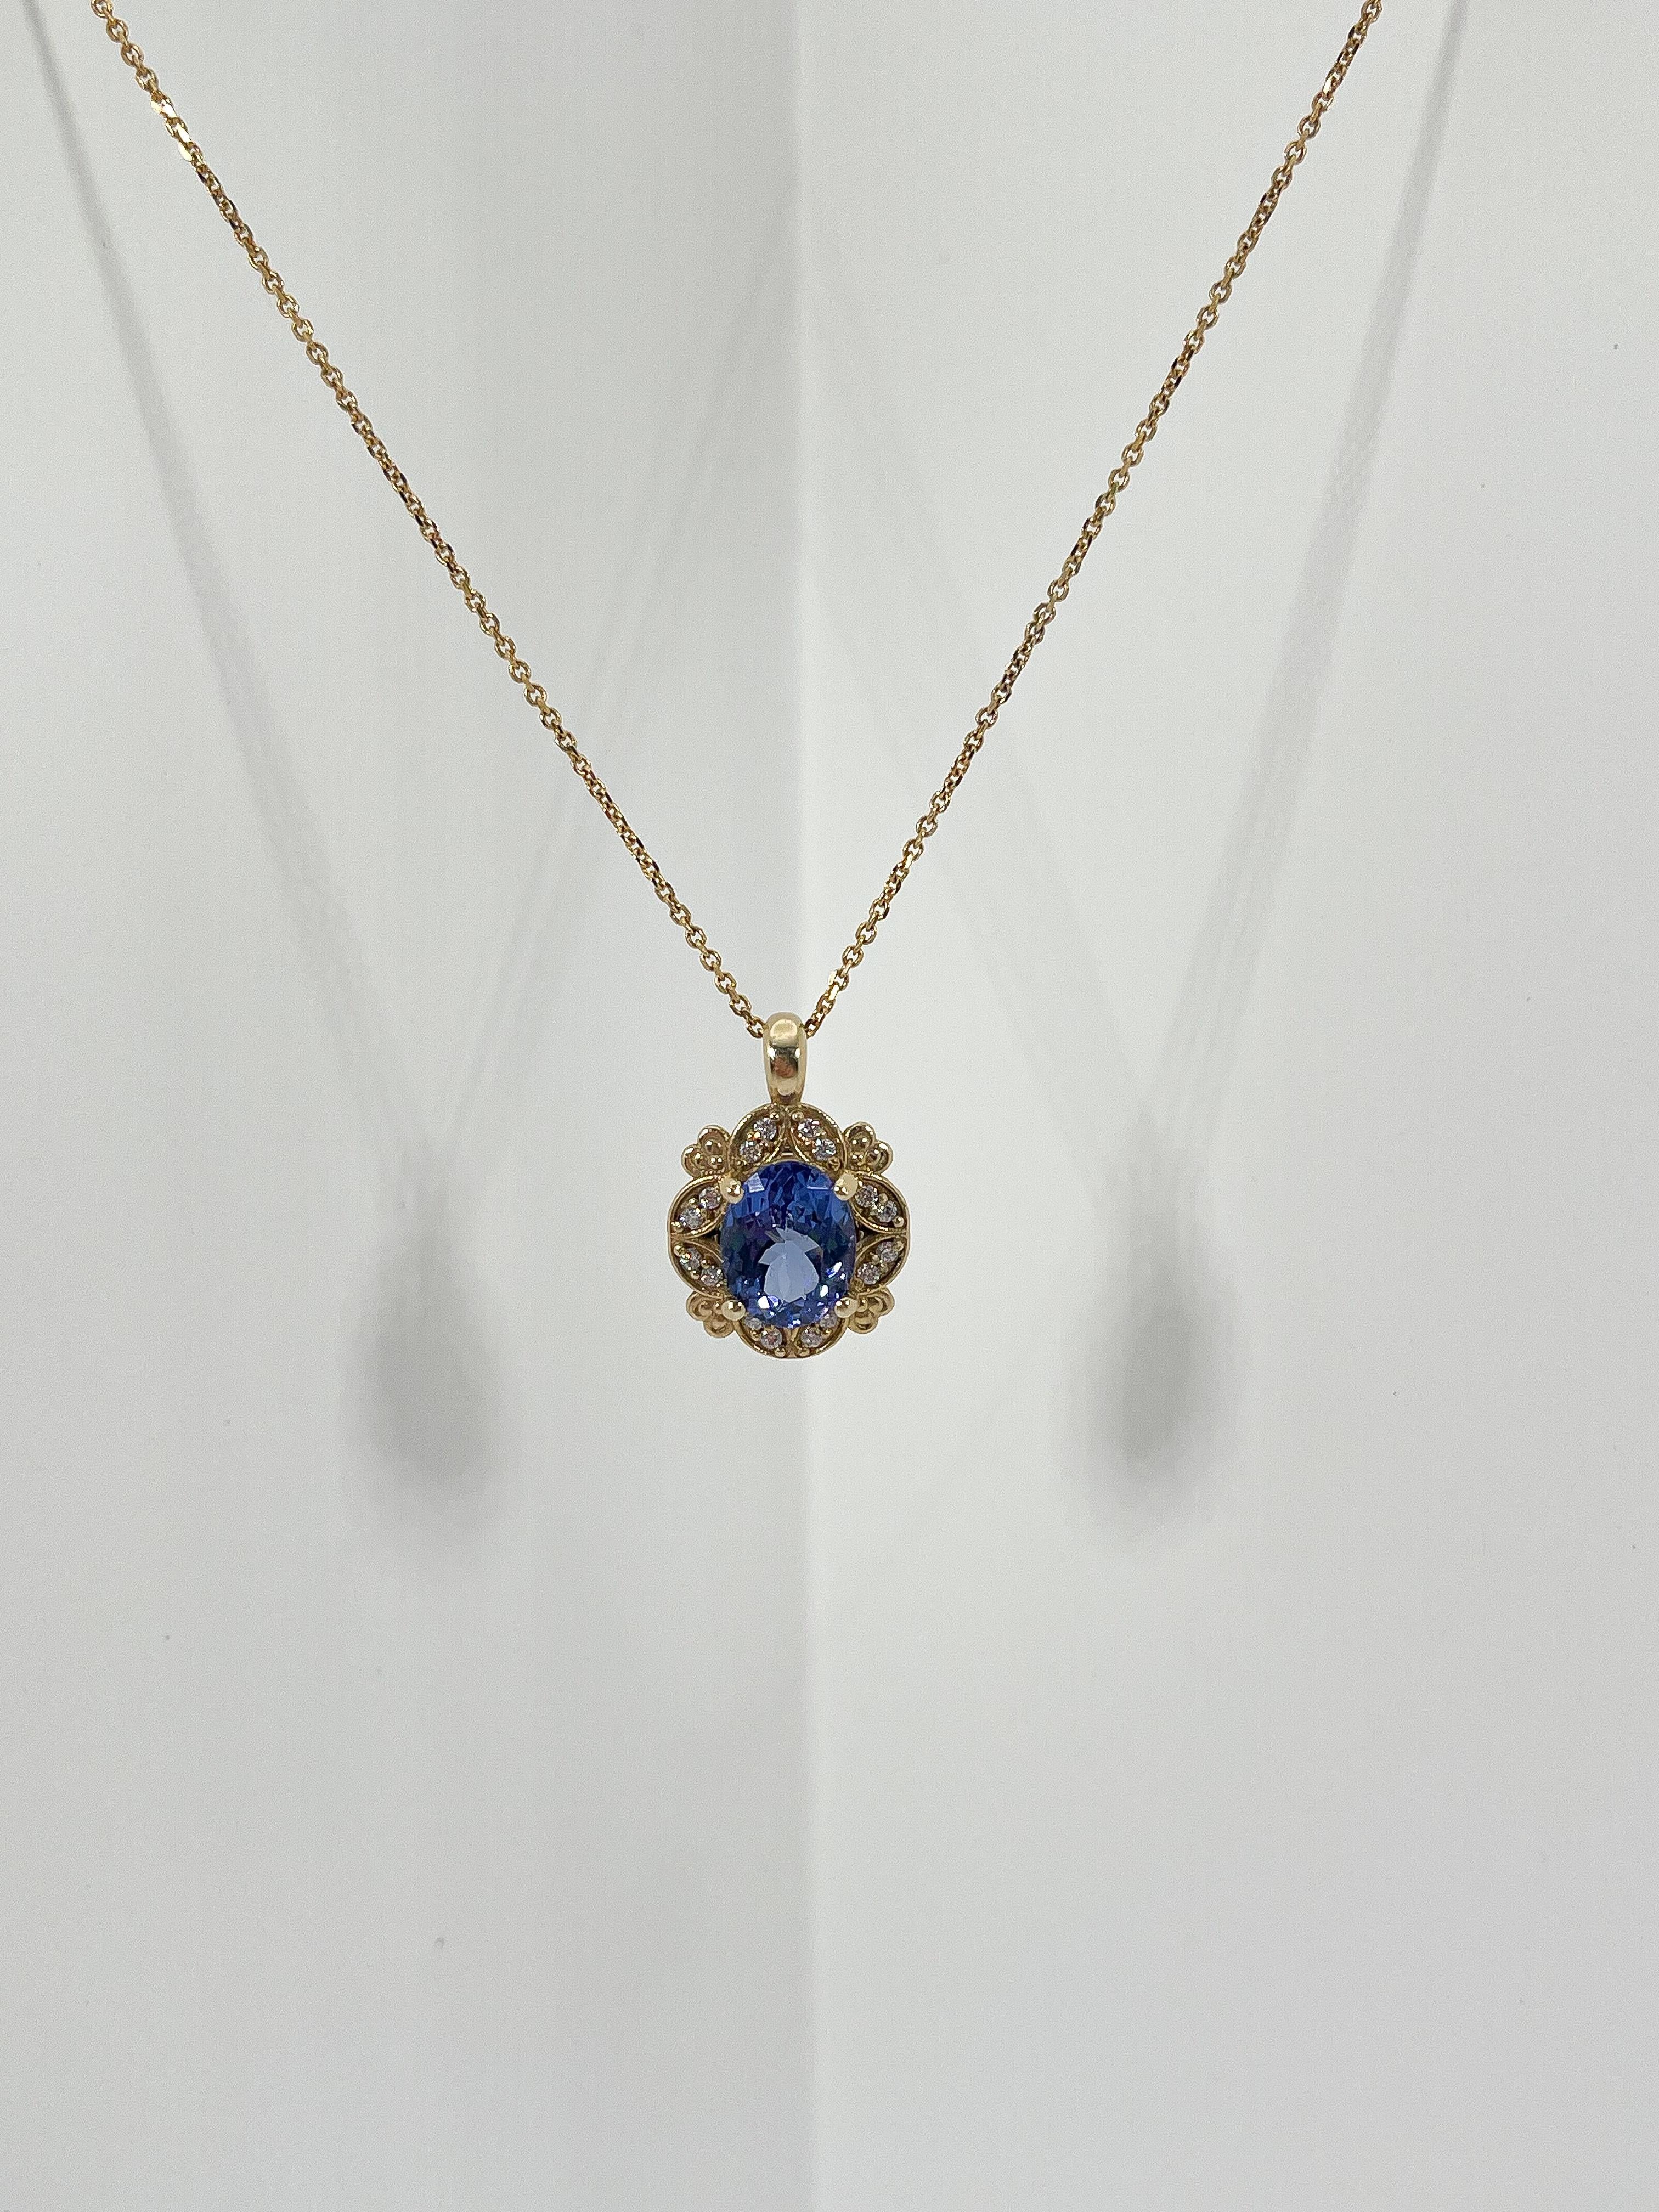 14K yellow gold pendant necklace with oval 2.20 carat Tanzanite and round diamonds on the outside. The size of the pendant measures 14.5 x 13.5mm, and the stone measures 9.4 x 7.4mm. The weight of the necklace is 5.7 grams and measures 18 inches.